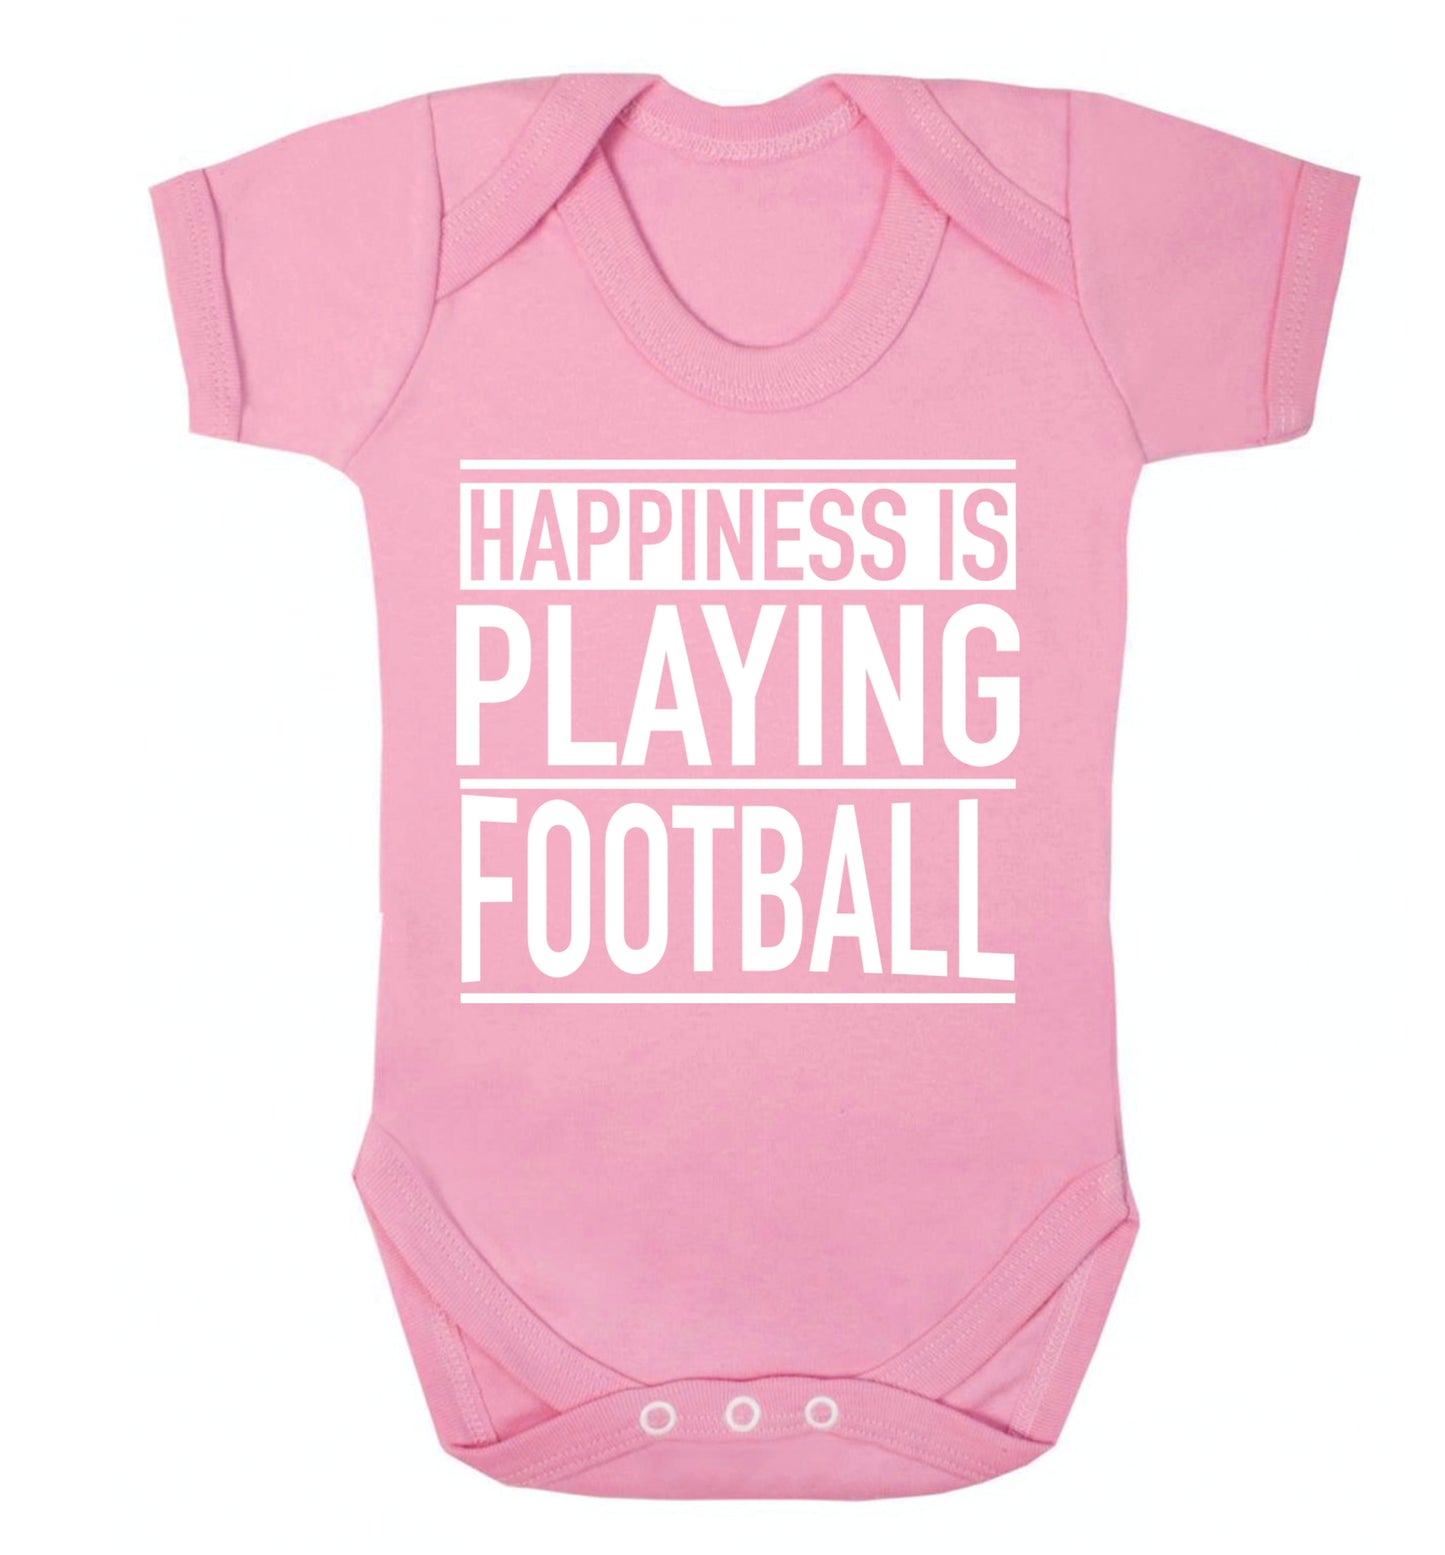 Happiness is playing football Baby Vest pale pink 18-24 months